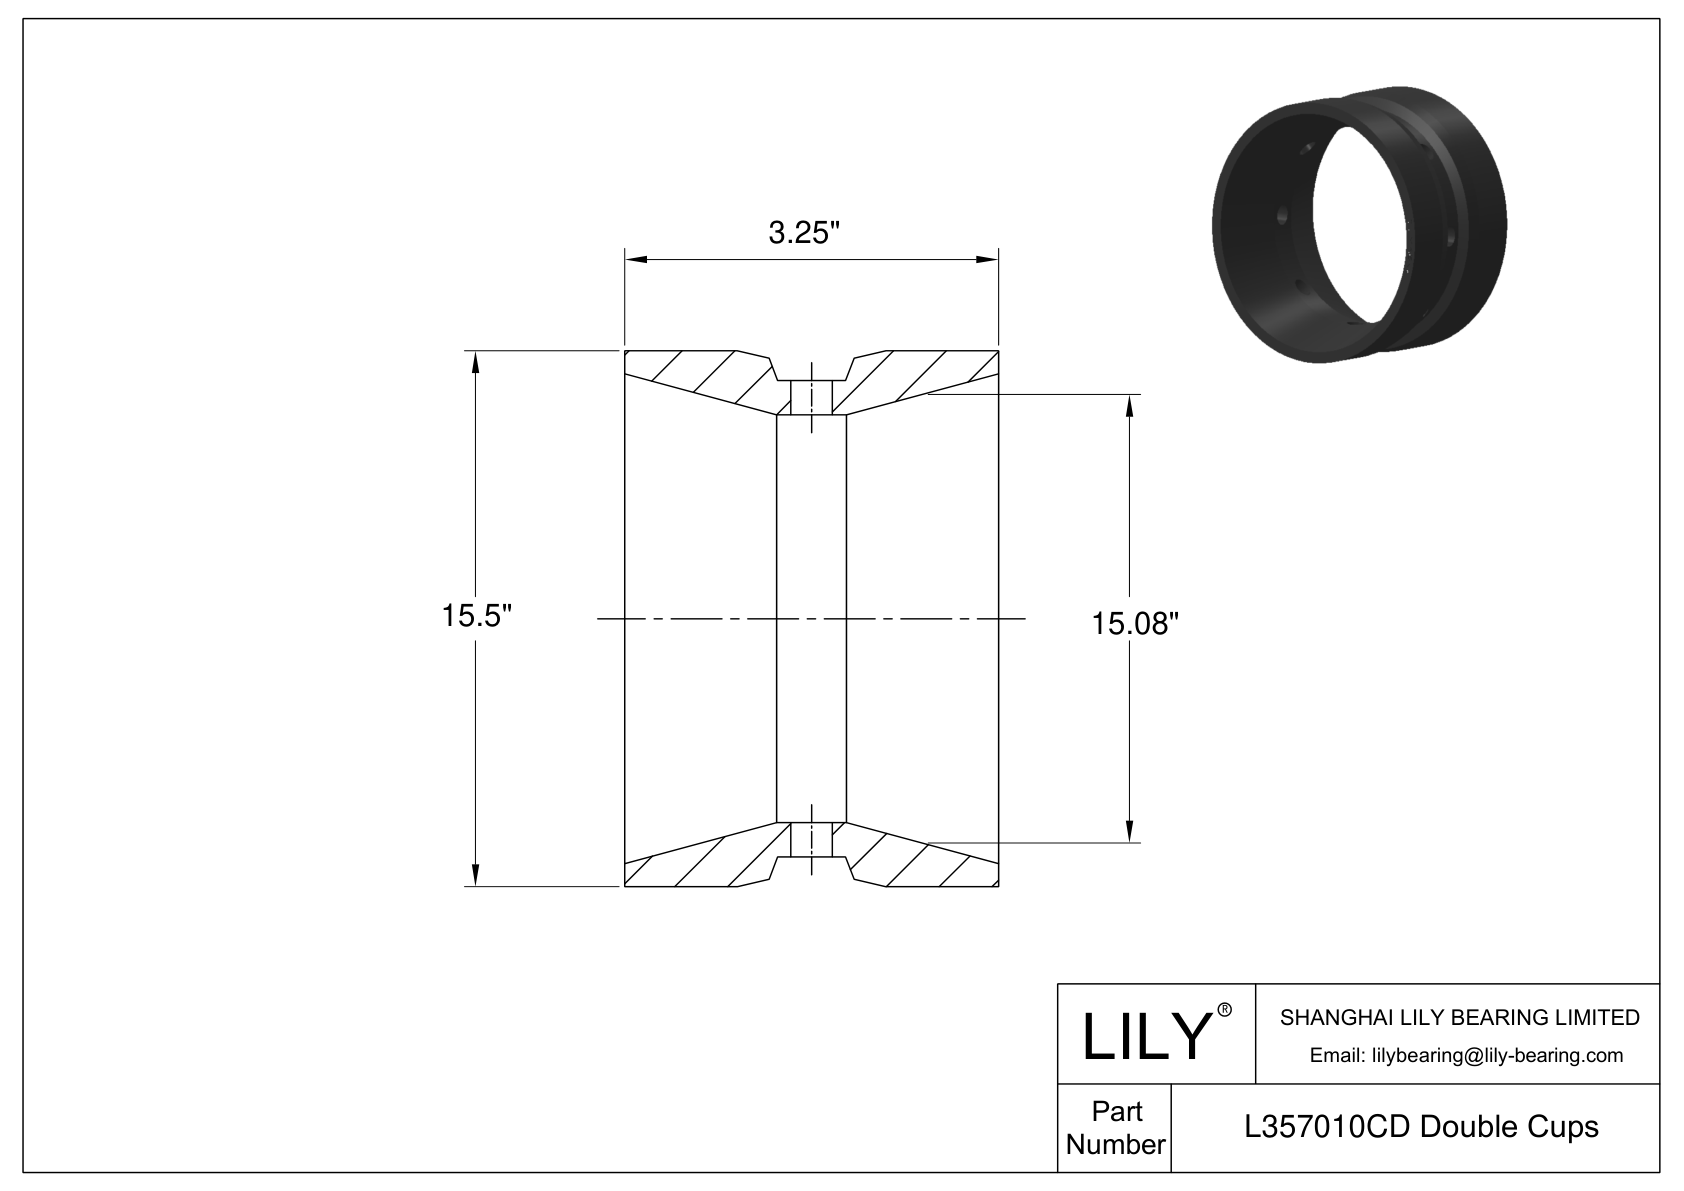 L357010CD Double Cups (Imperial) cad drawing